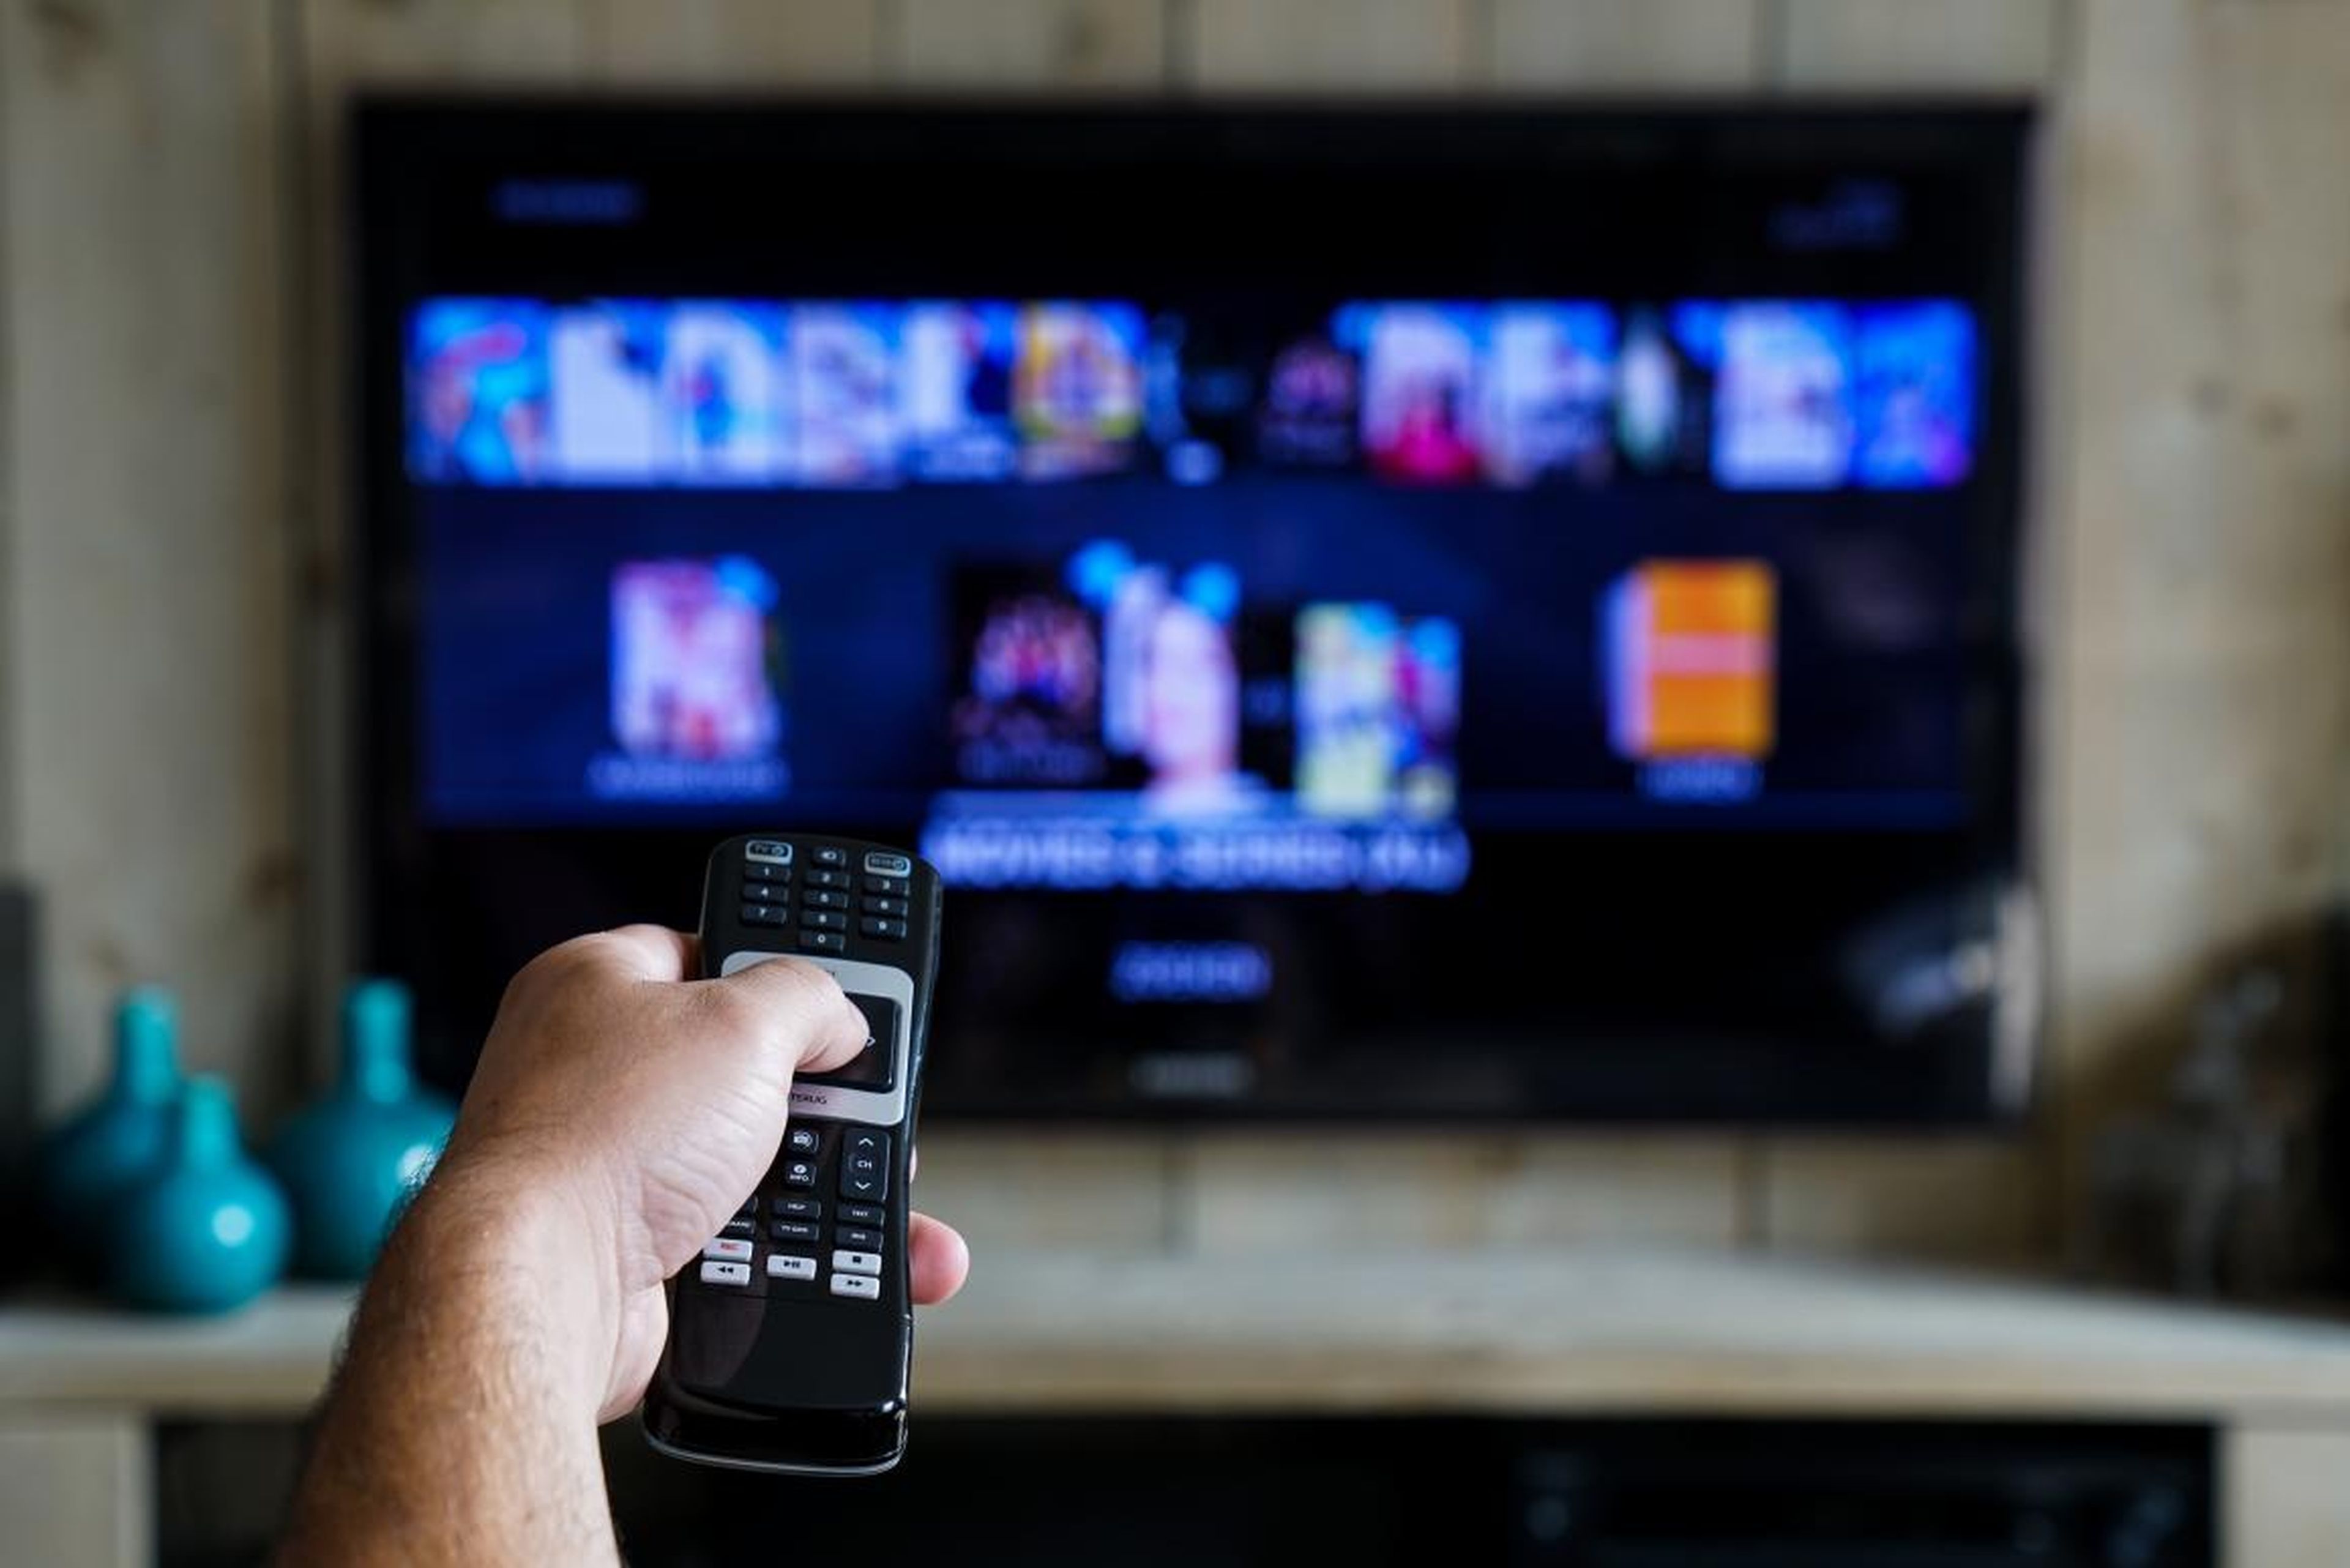 If you're looking at premium TV-streaming services, there are a lot to choose from in 2019.